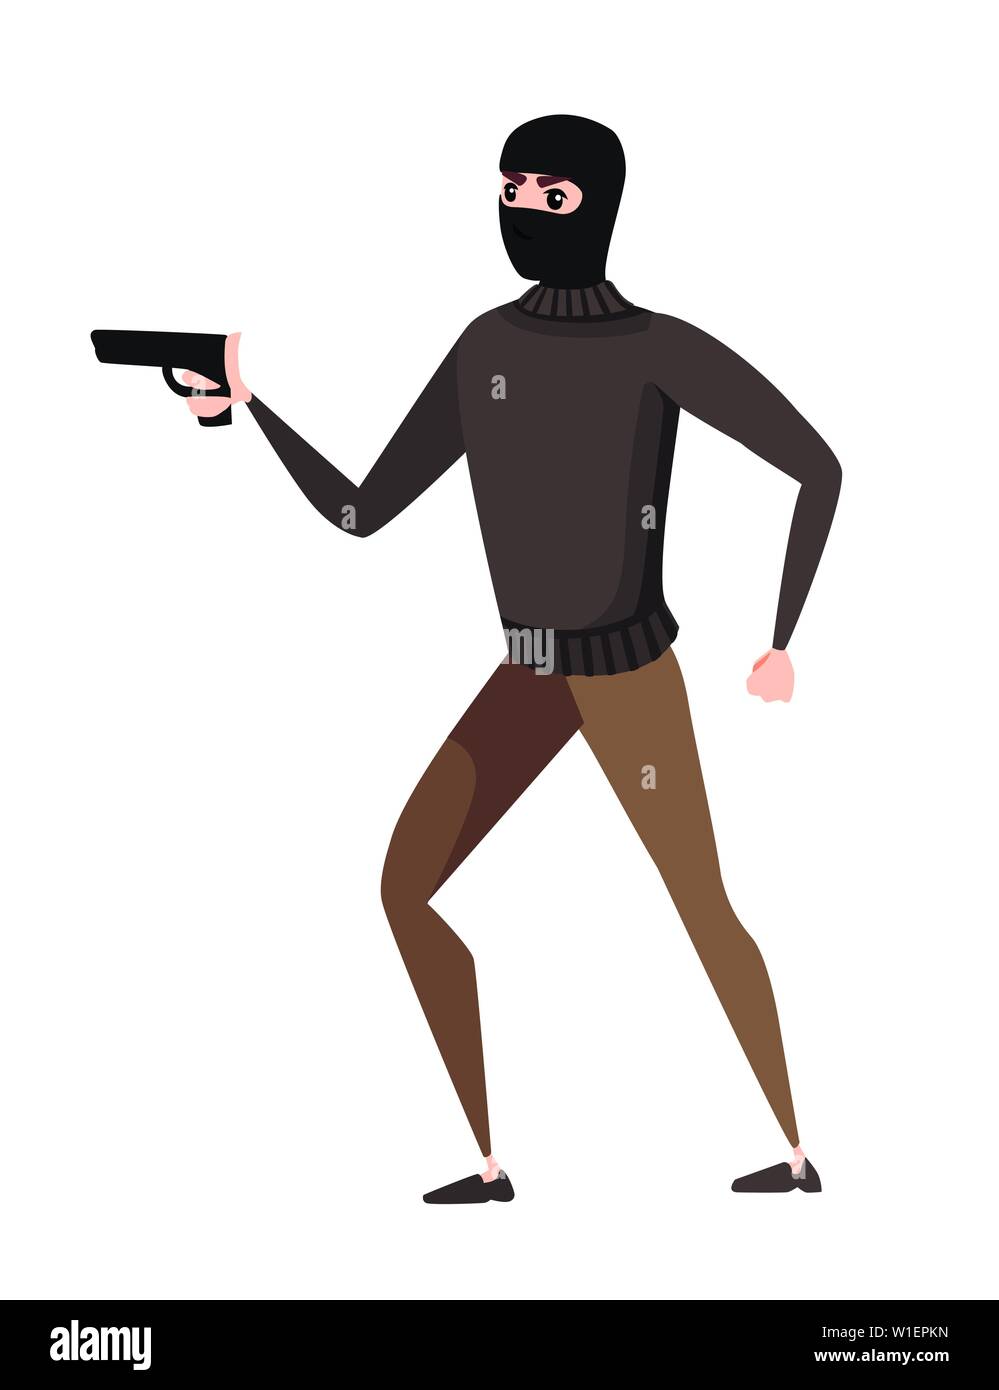 Thief during robbery holding gun in one hand cartoon character design ...